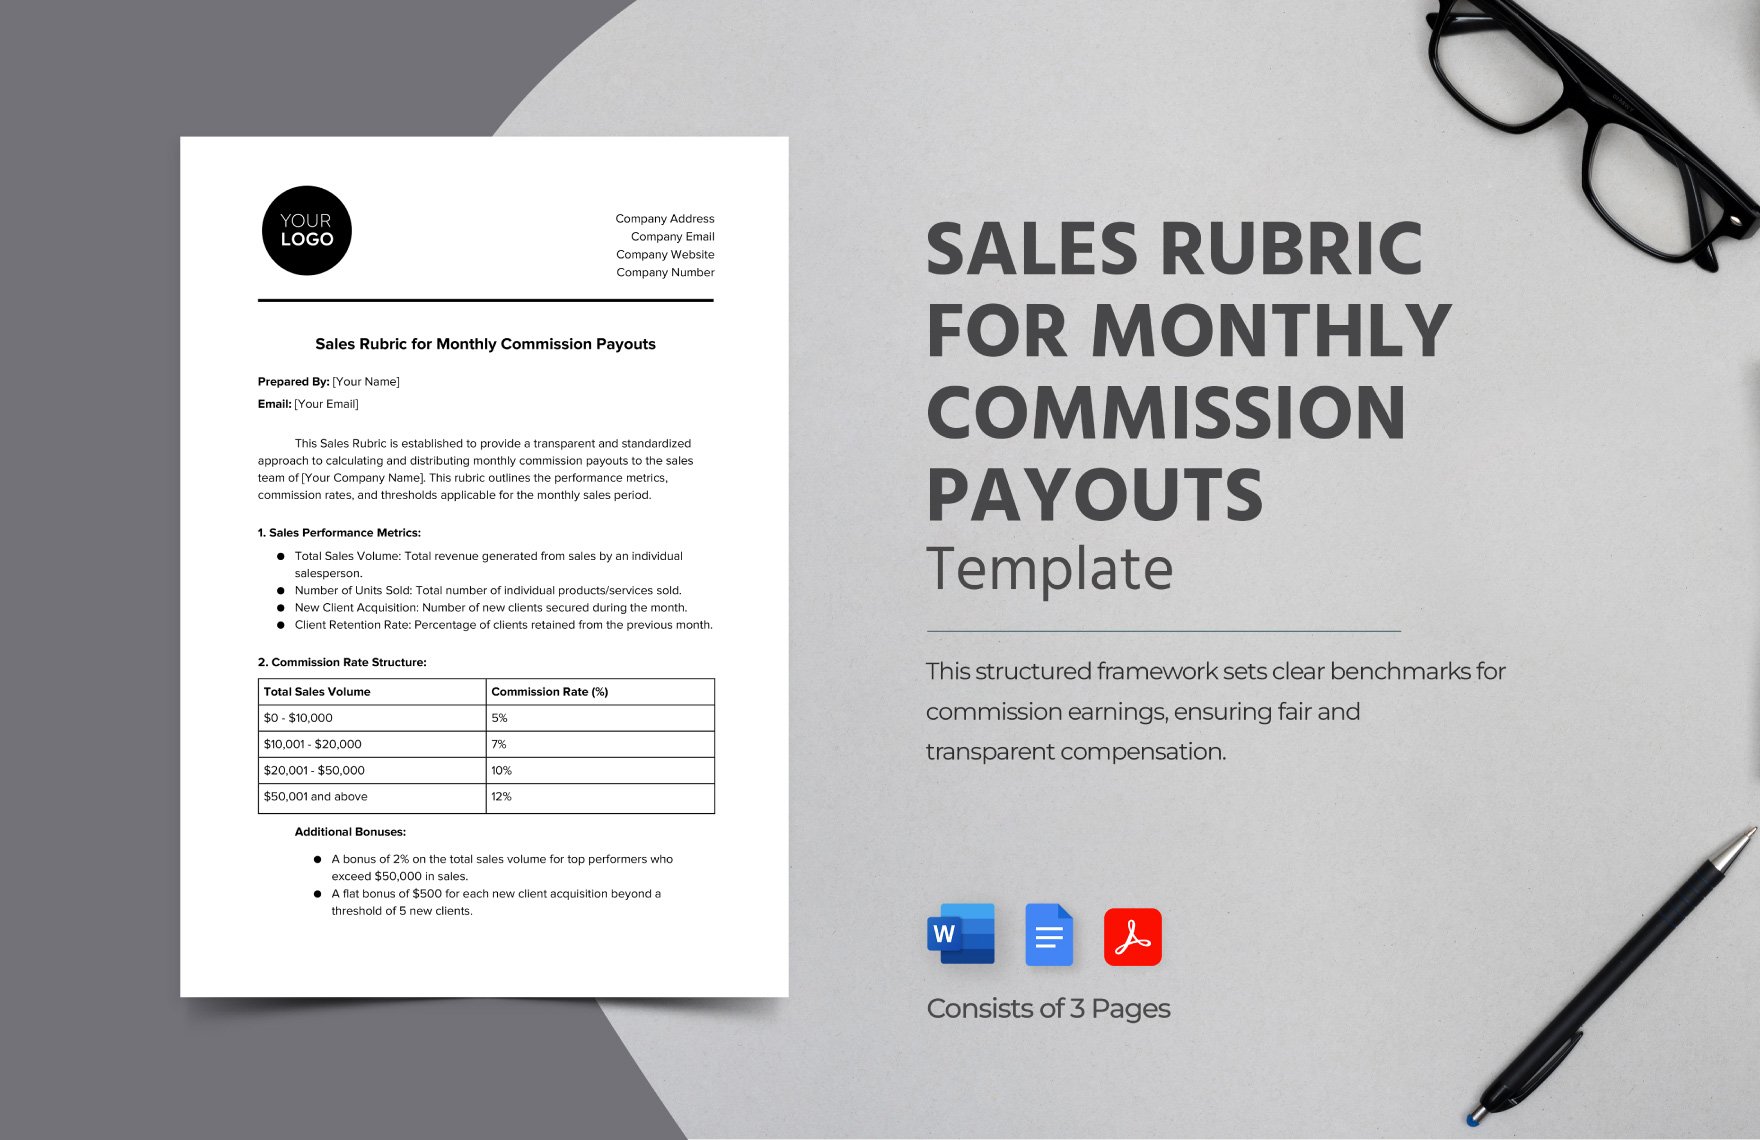 Sales Rubric for Monthly Commission Payouts Template